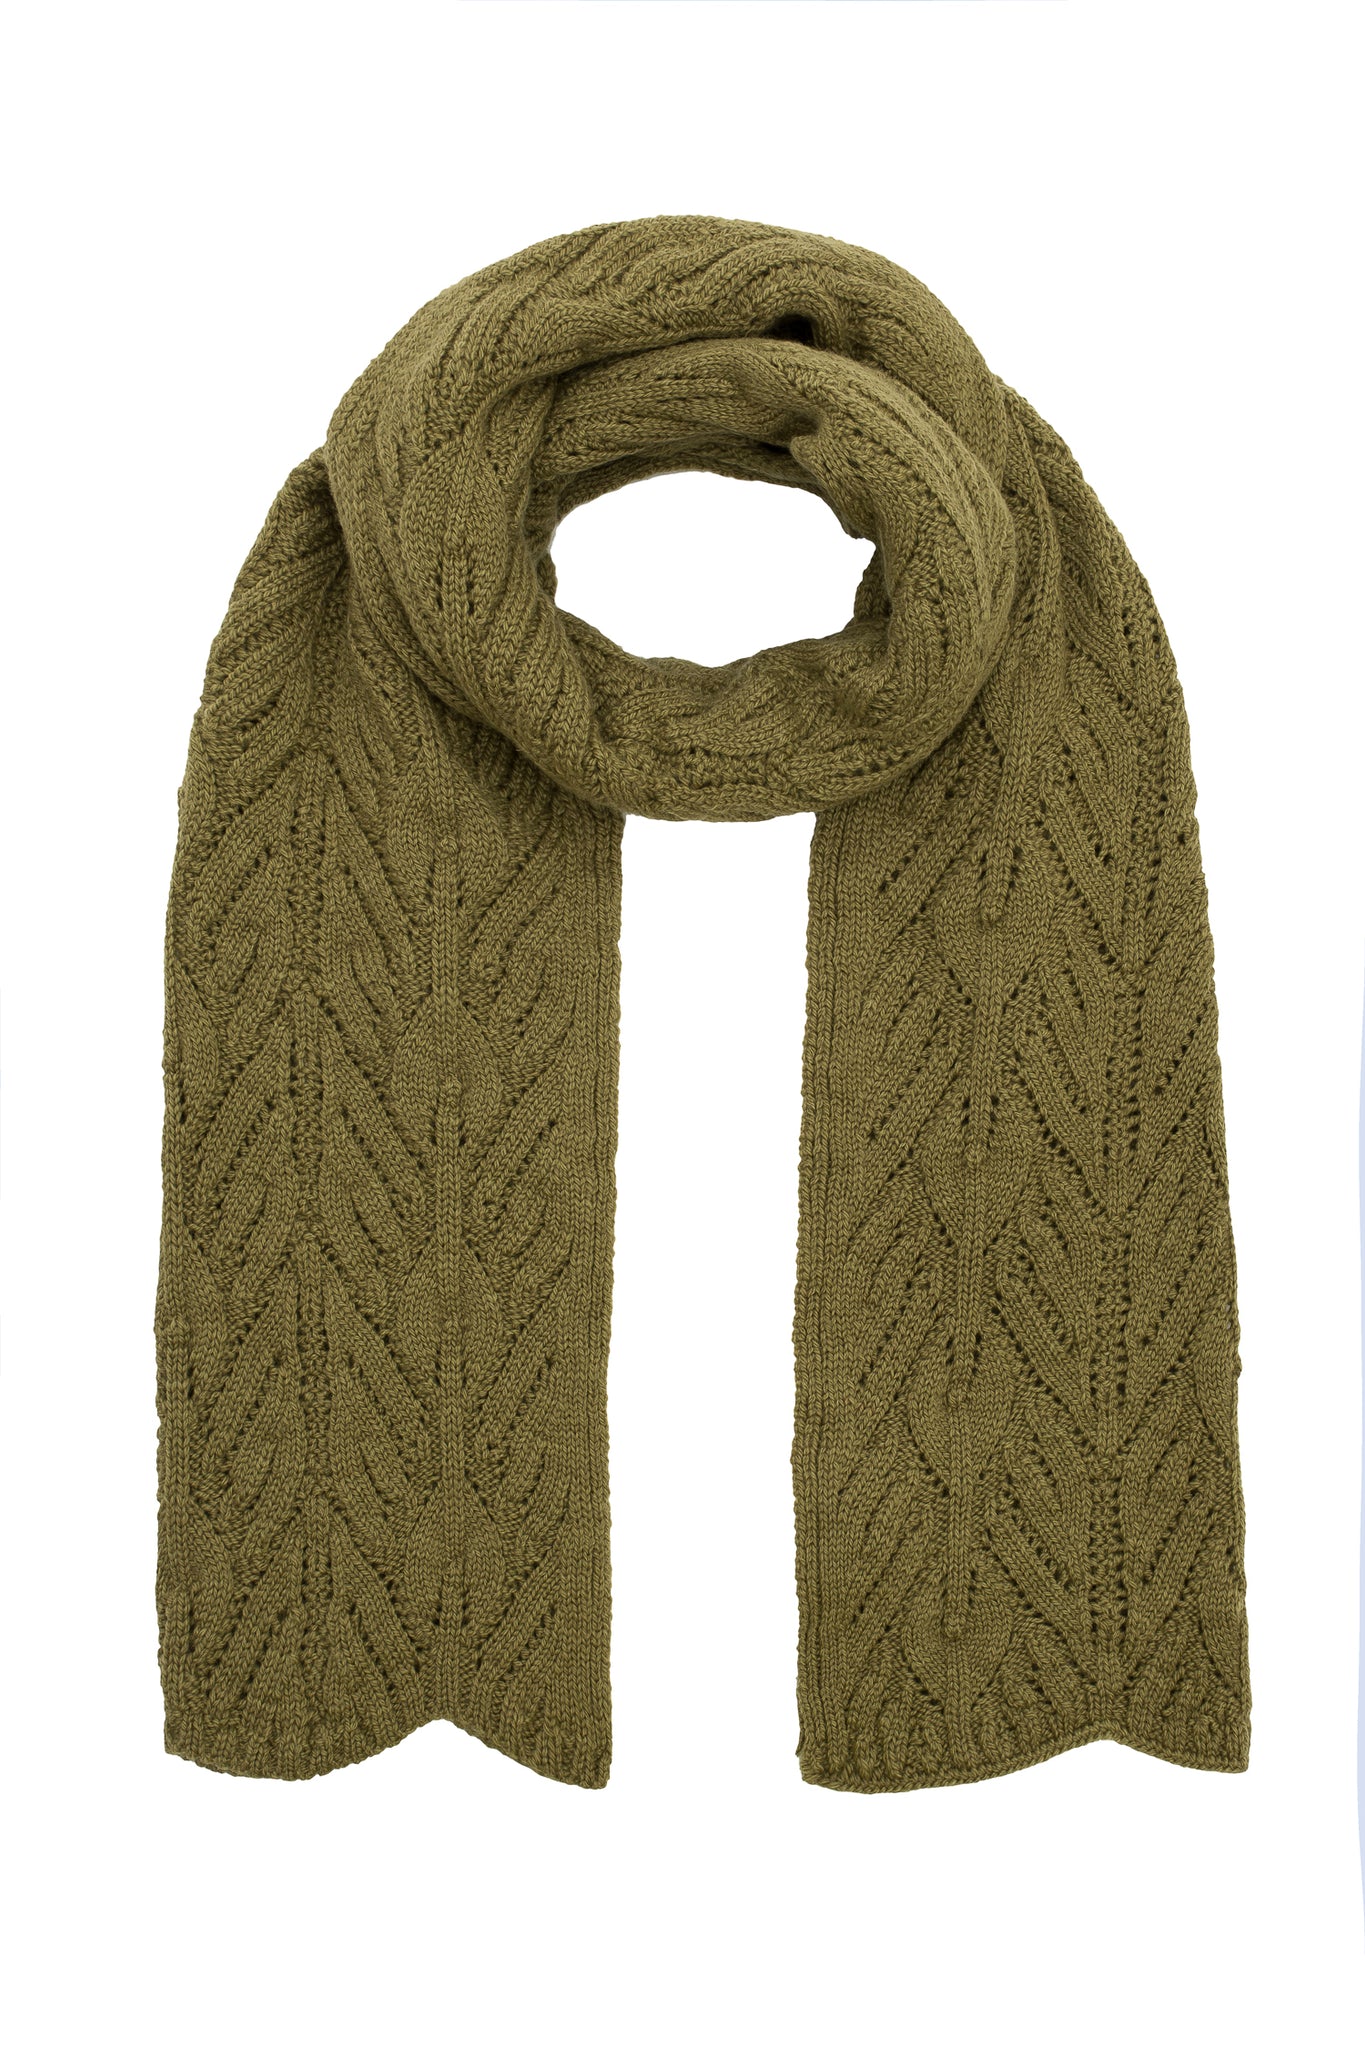 Scarf in Moss